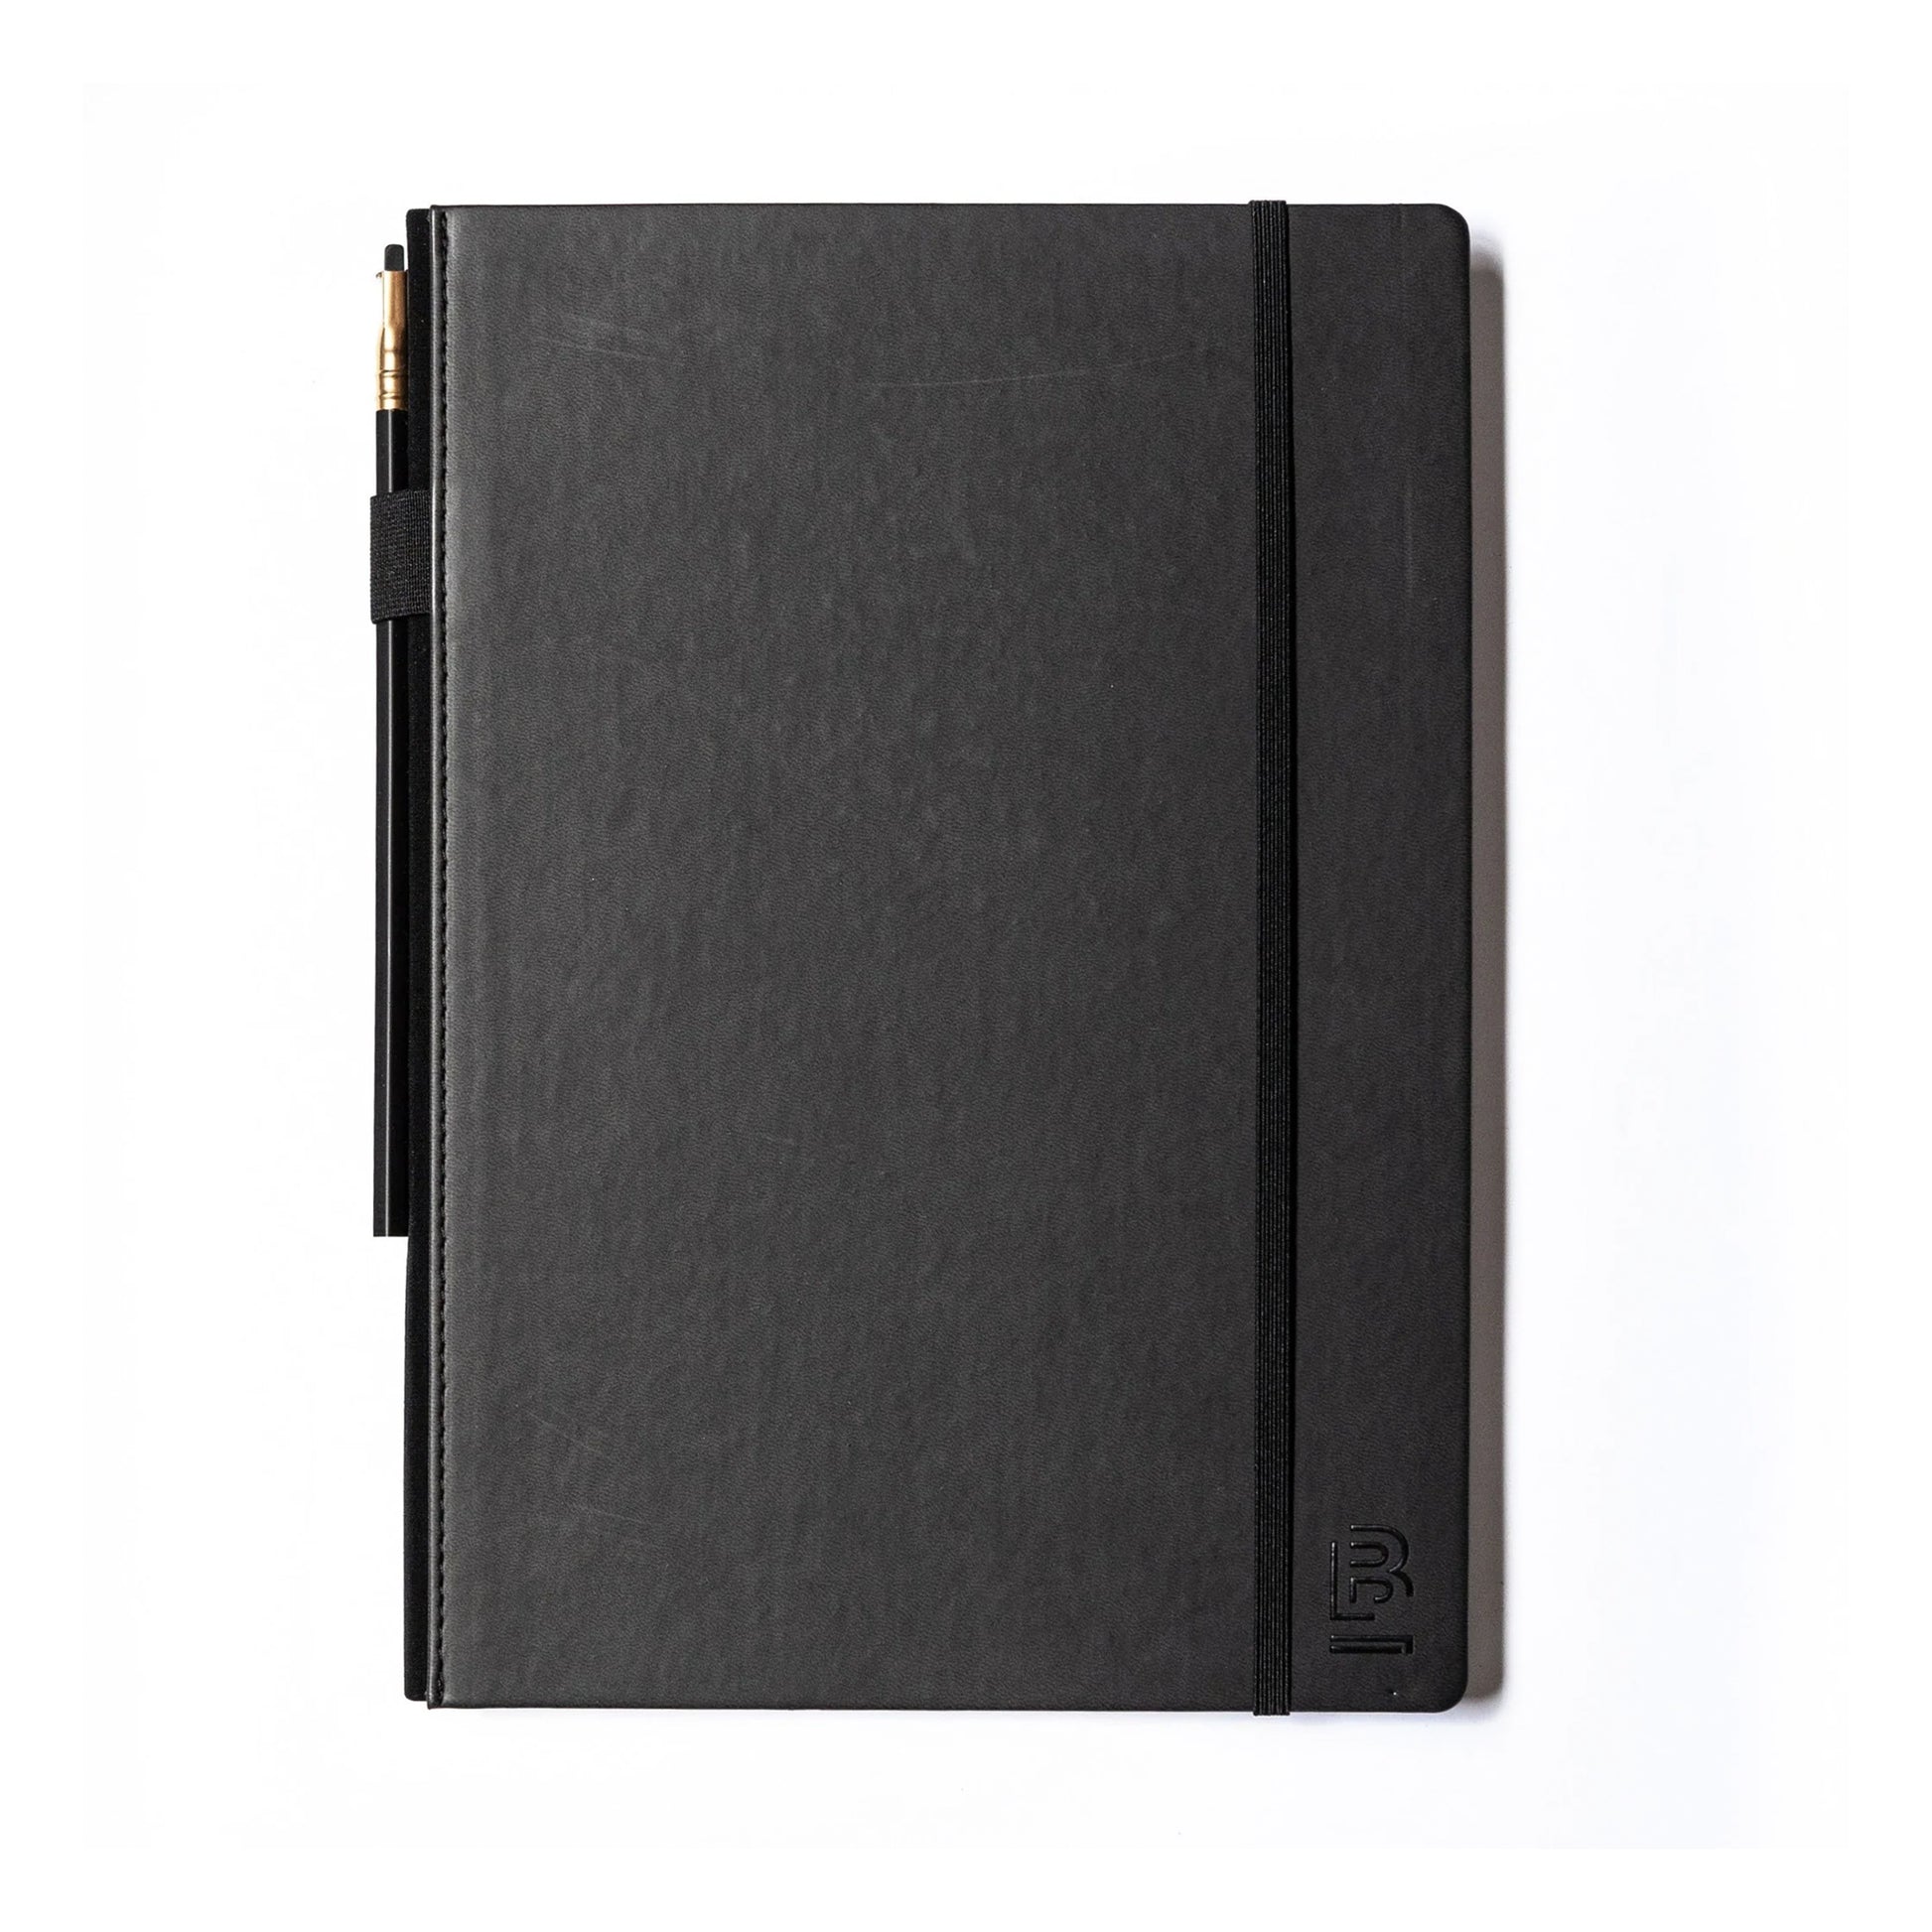 black sketch book with a black graphite pencil and pencil holder lying on a white background